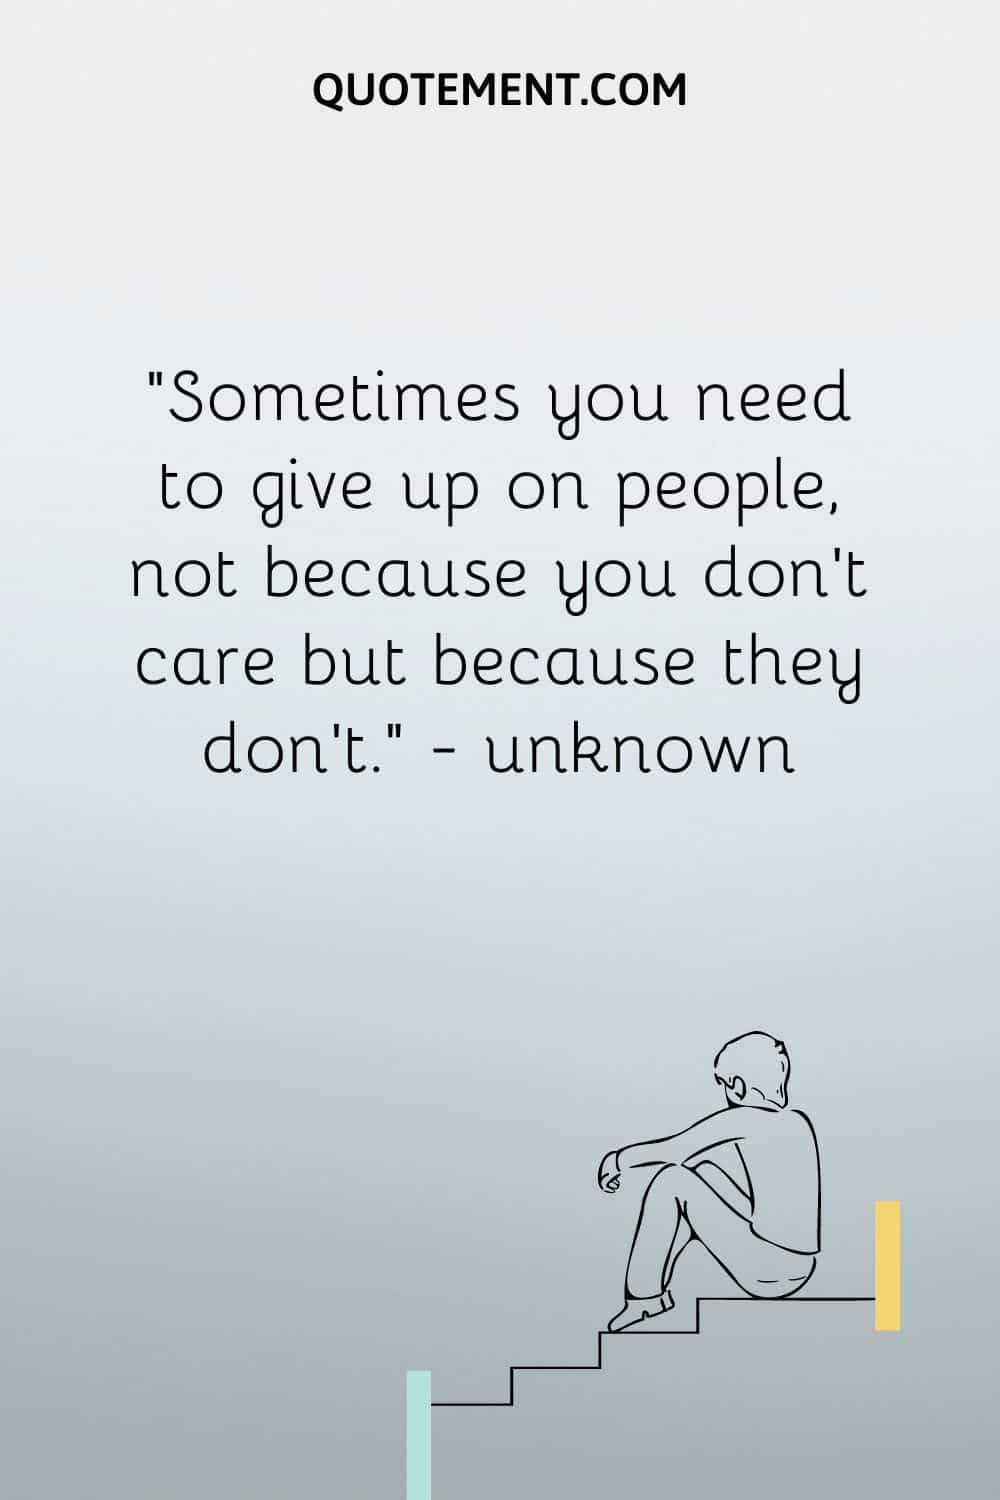 Sometimes you need to give up on people